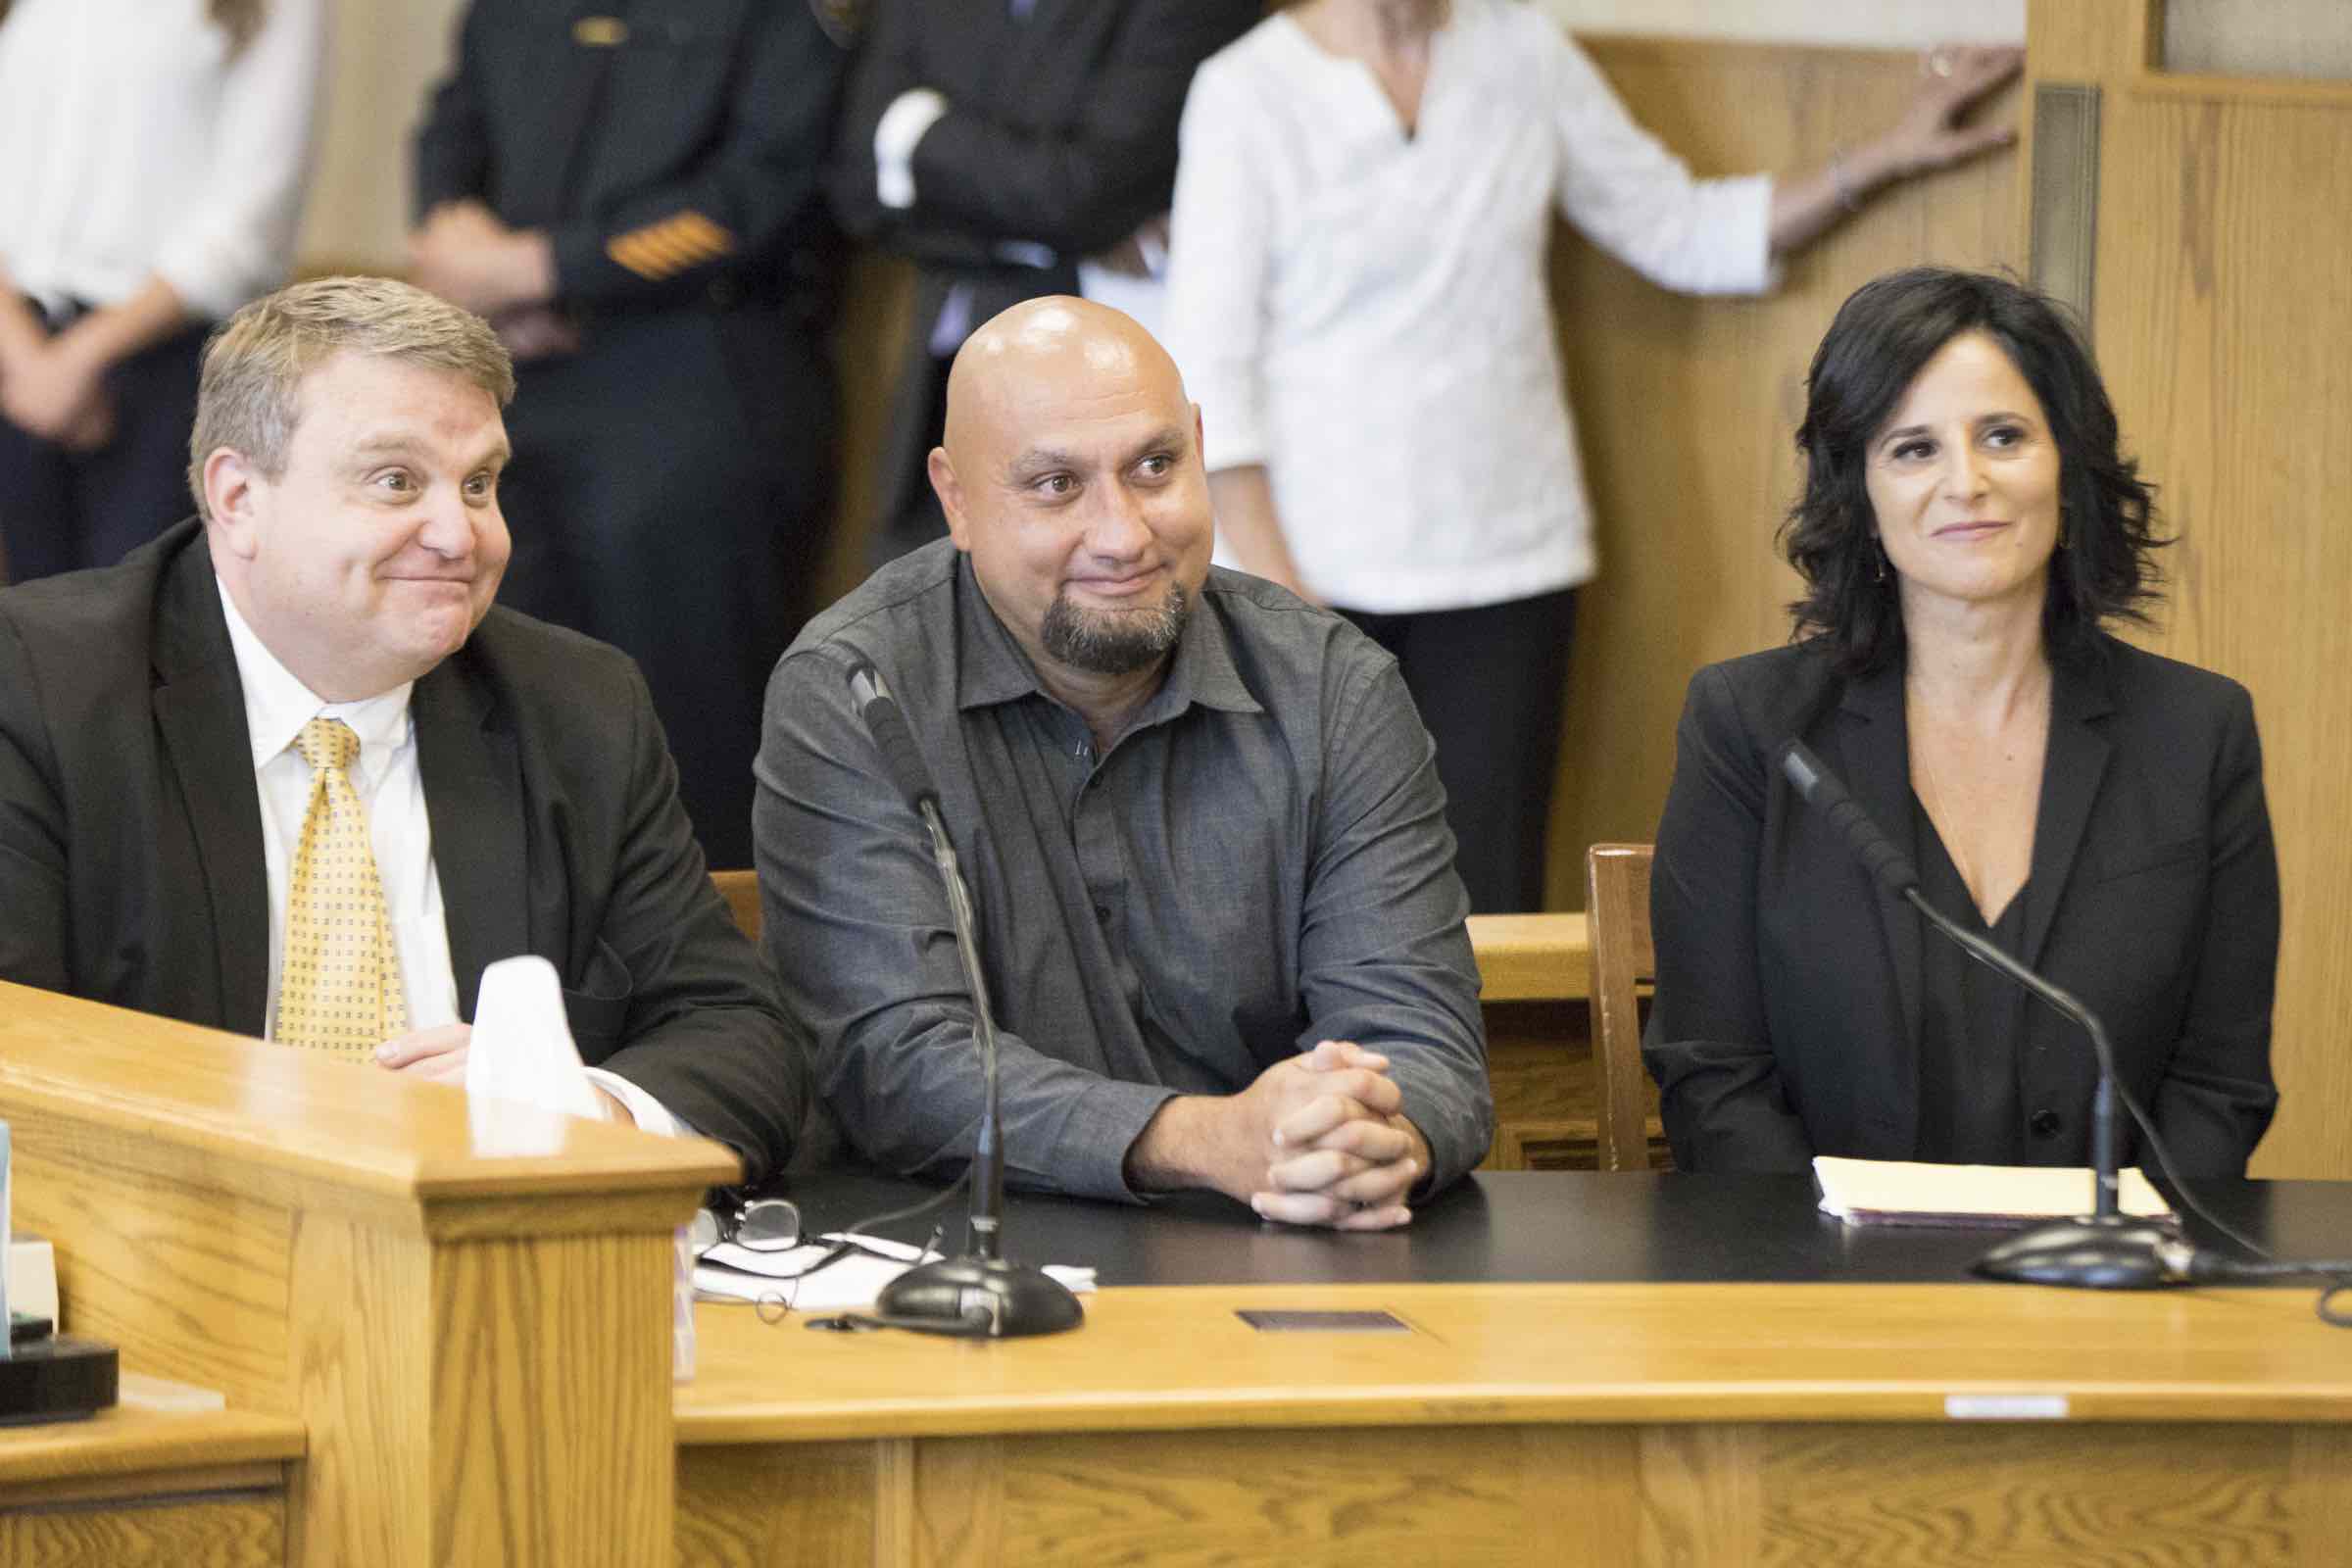 John K. Thomas, Christopher Tapp, and Vanessa Potkin - Post Conviction Relief Proceedings on Wednesday, July 17, 2019 in Idaho Falls, Idaho. (Image: Otto Kitsinger/AP Images for The Innocence Project)